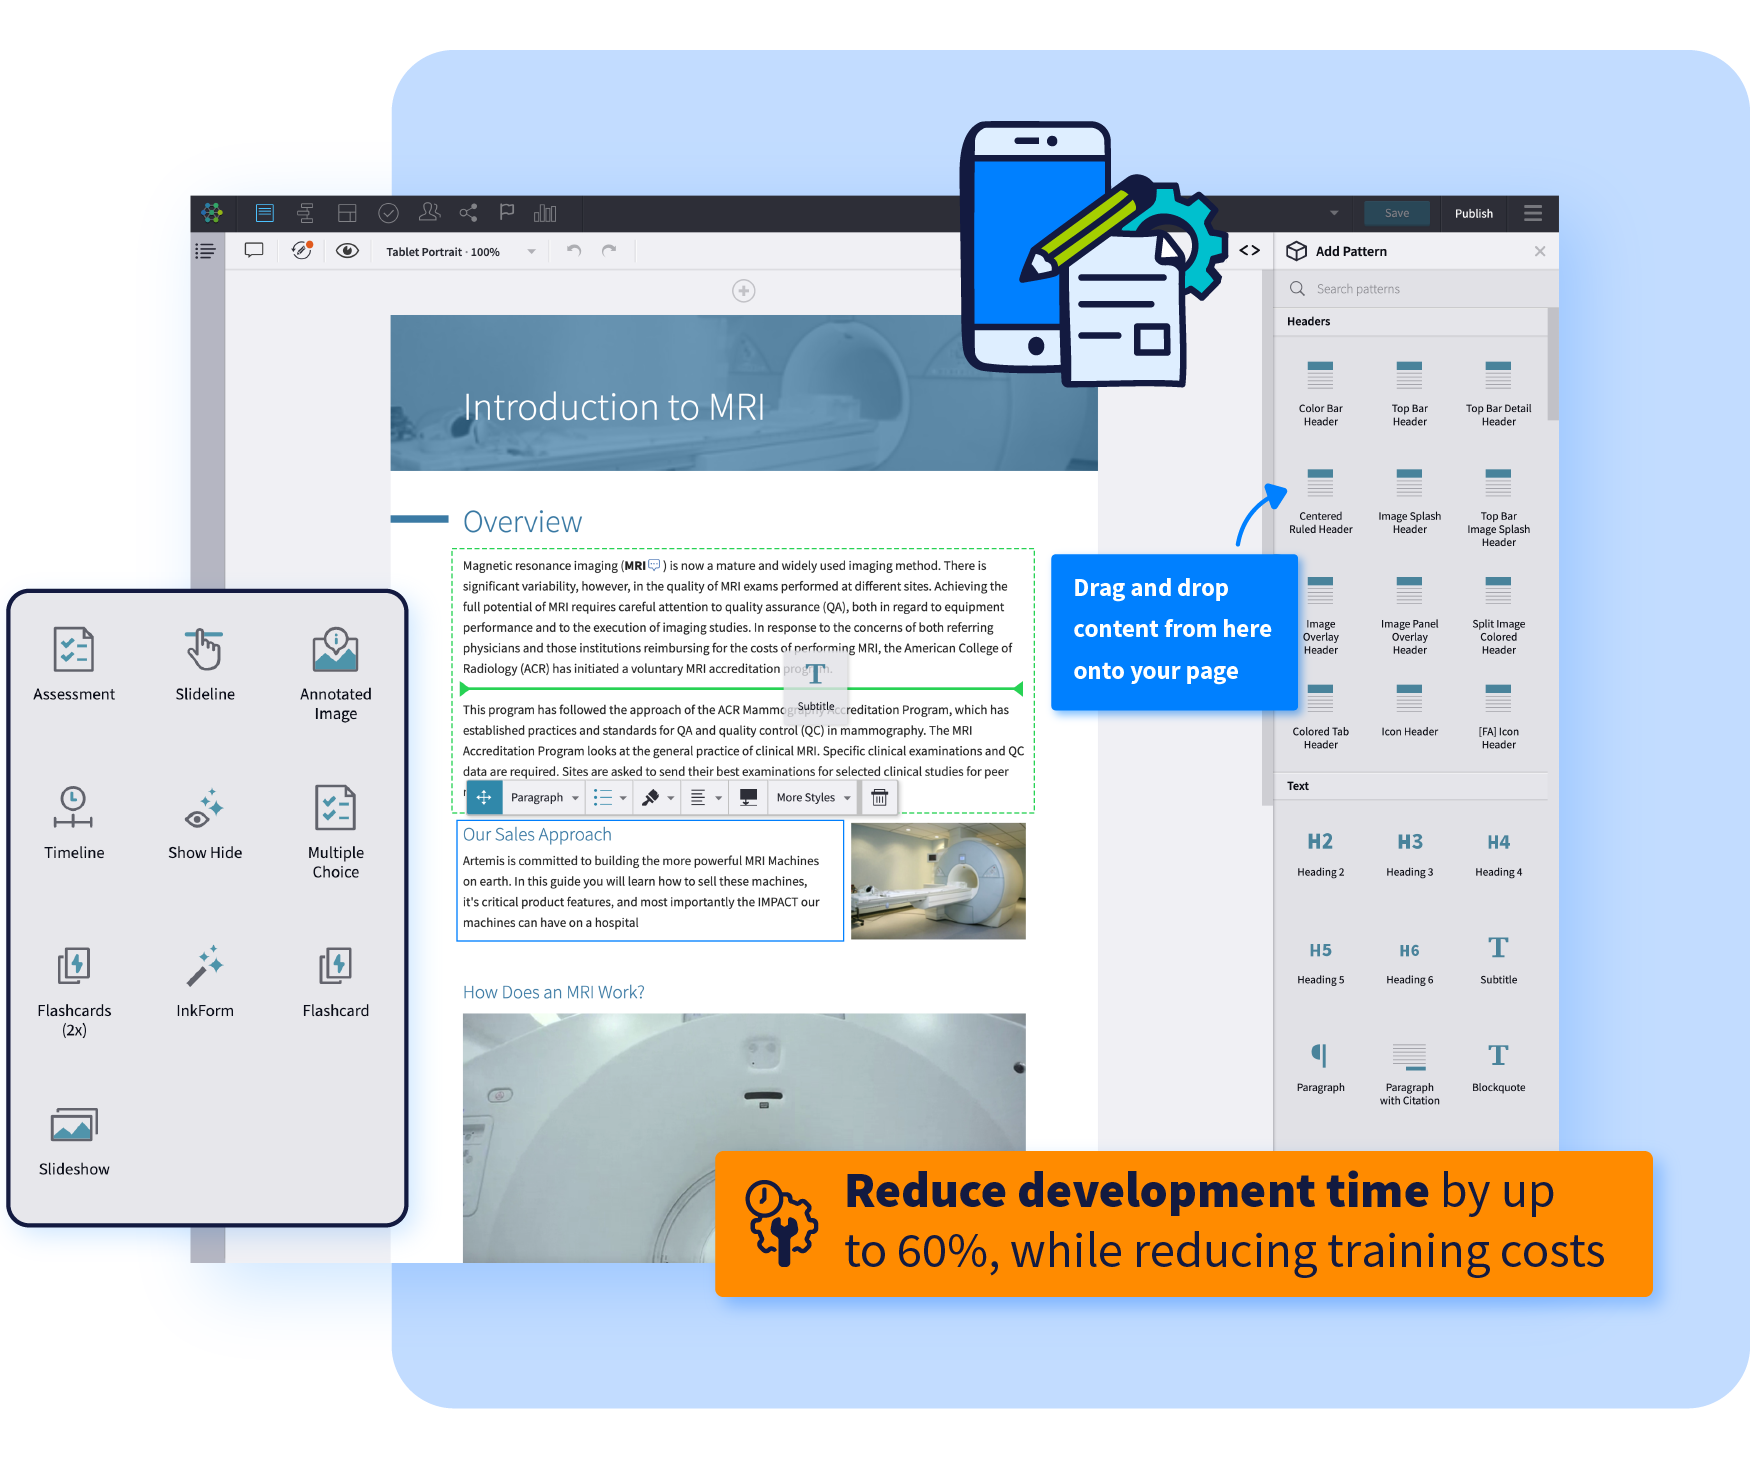 Content Authoring | With Inkling Habitat, you get intuitive, collaborative authoring for quick content creation and updates.